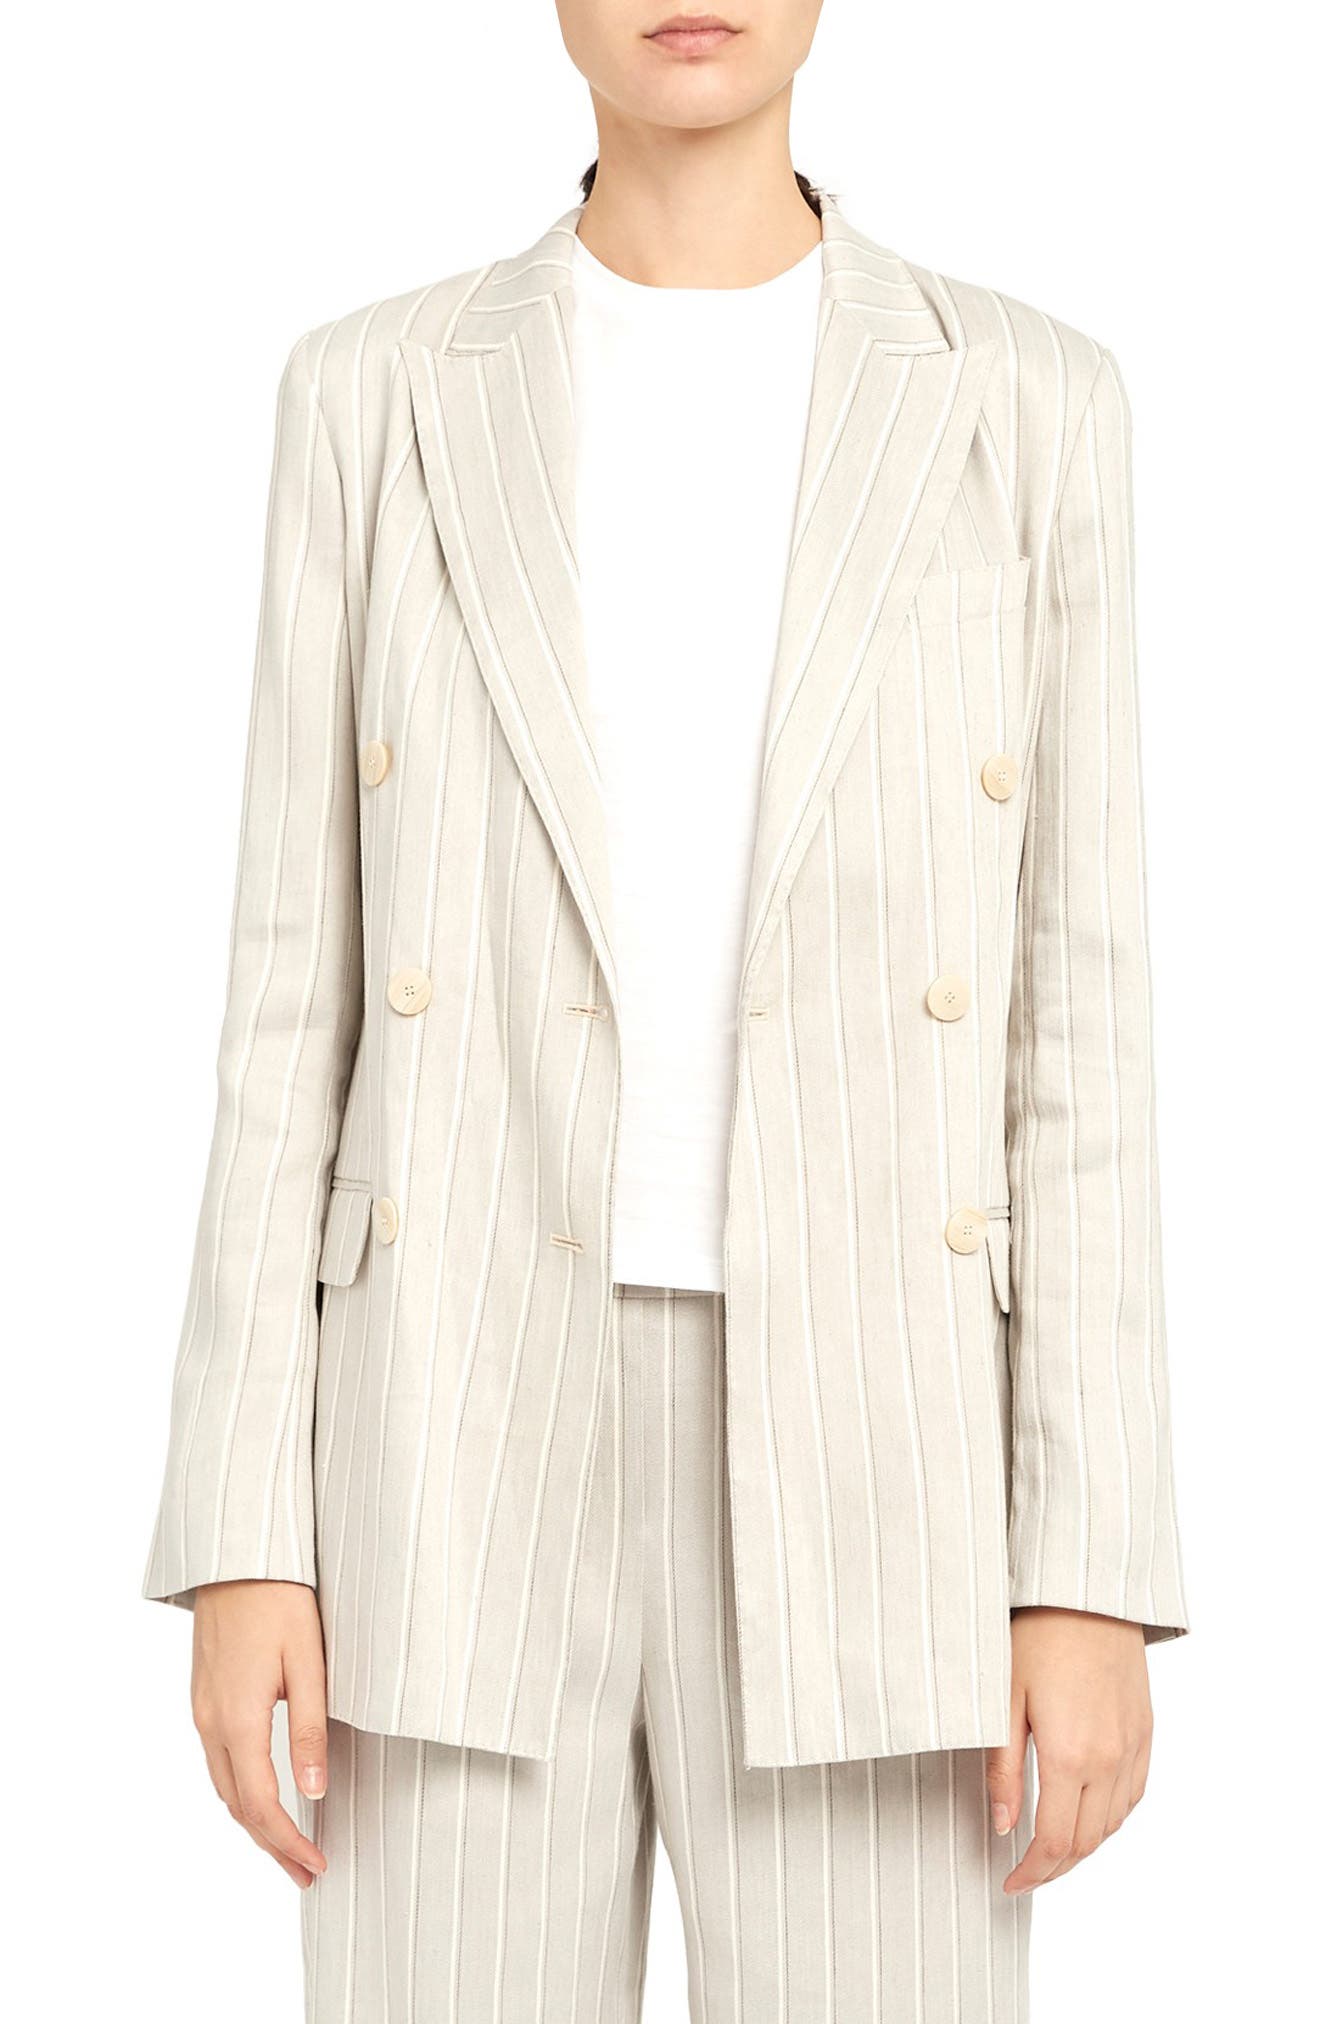 Theory | Double Breasted Stripe Linen Blend Jacket | Nordstrom Rack